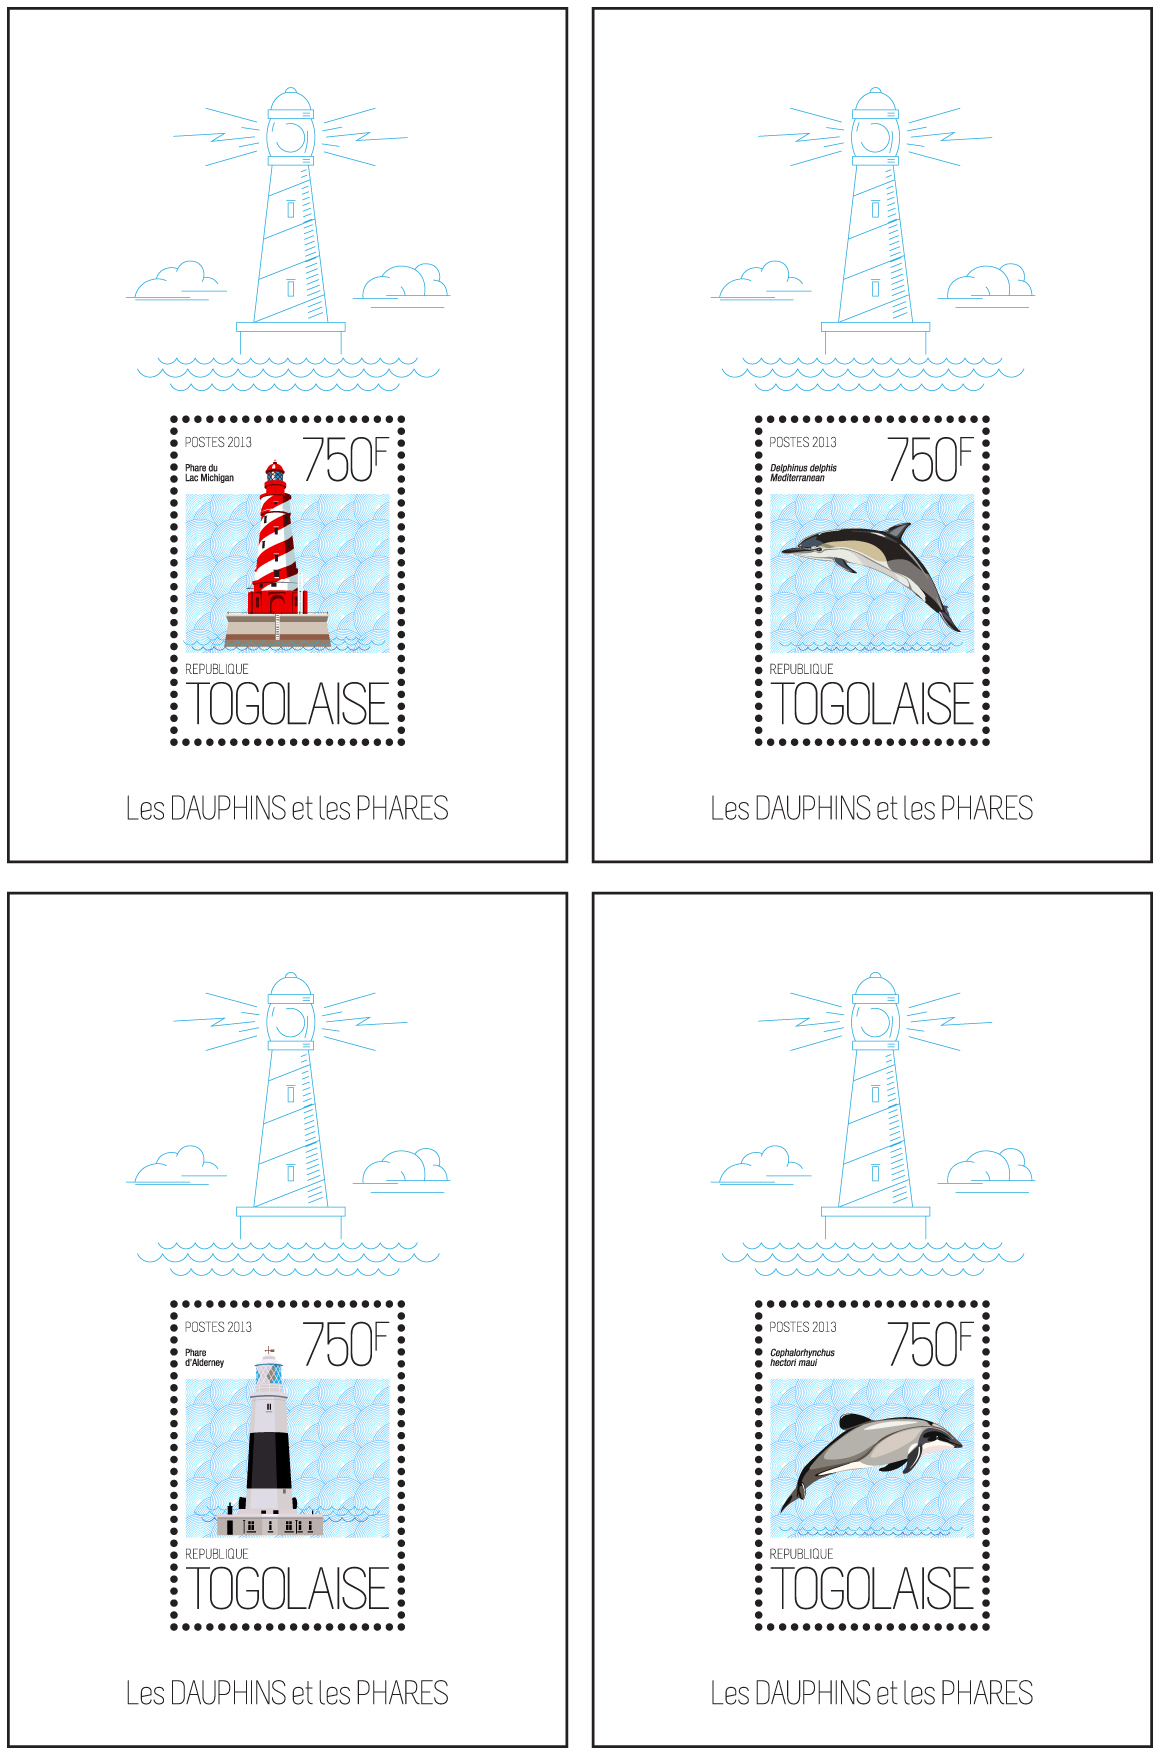 Dolphins and Lighthouses - Issue of Togo postage stamps